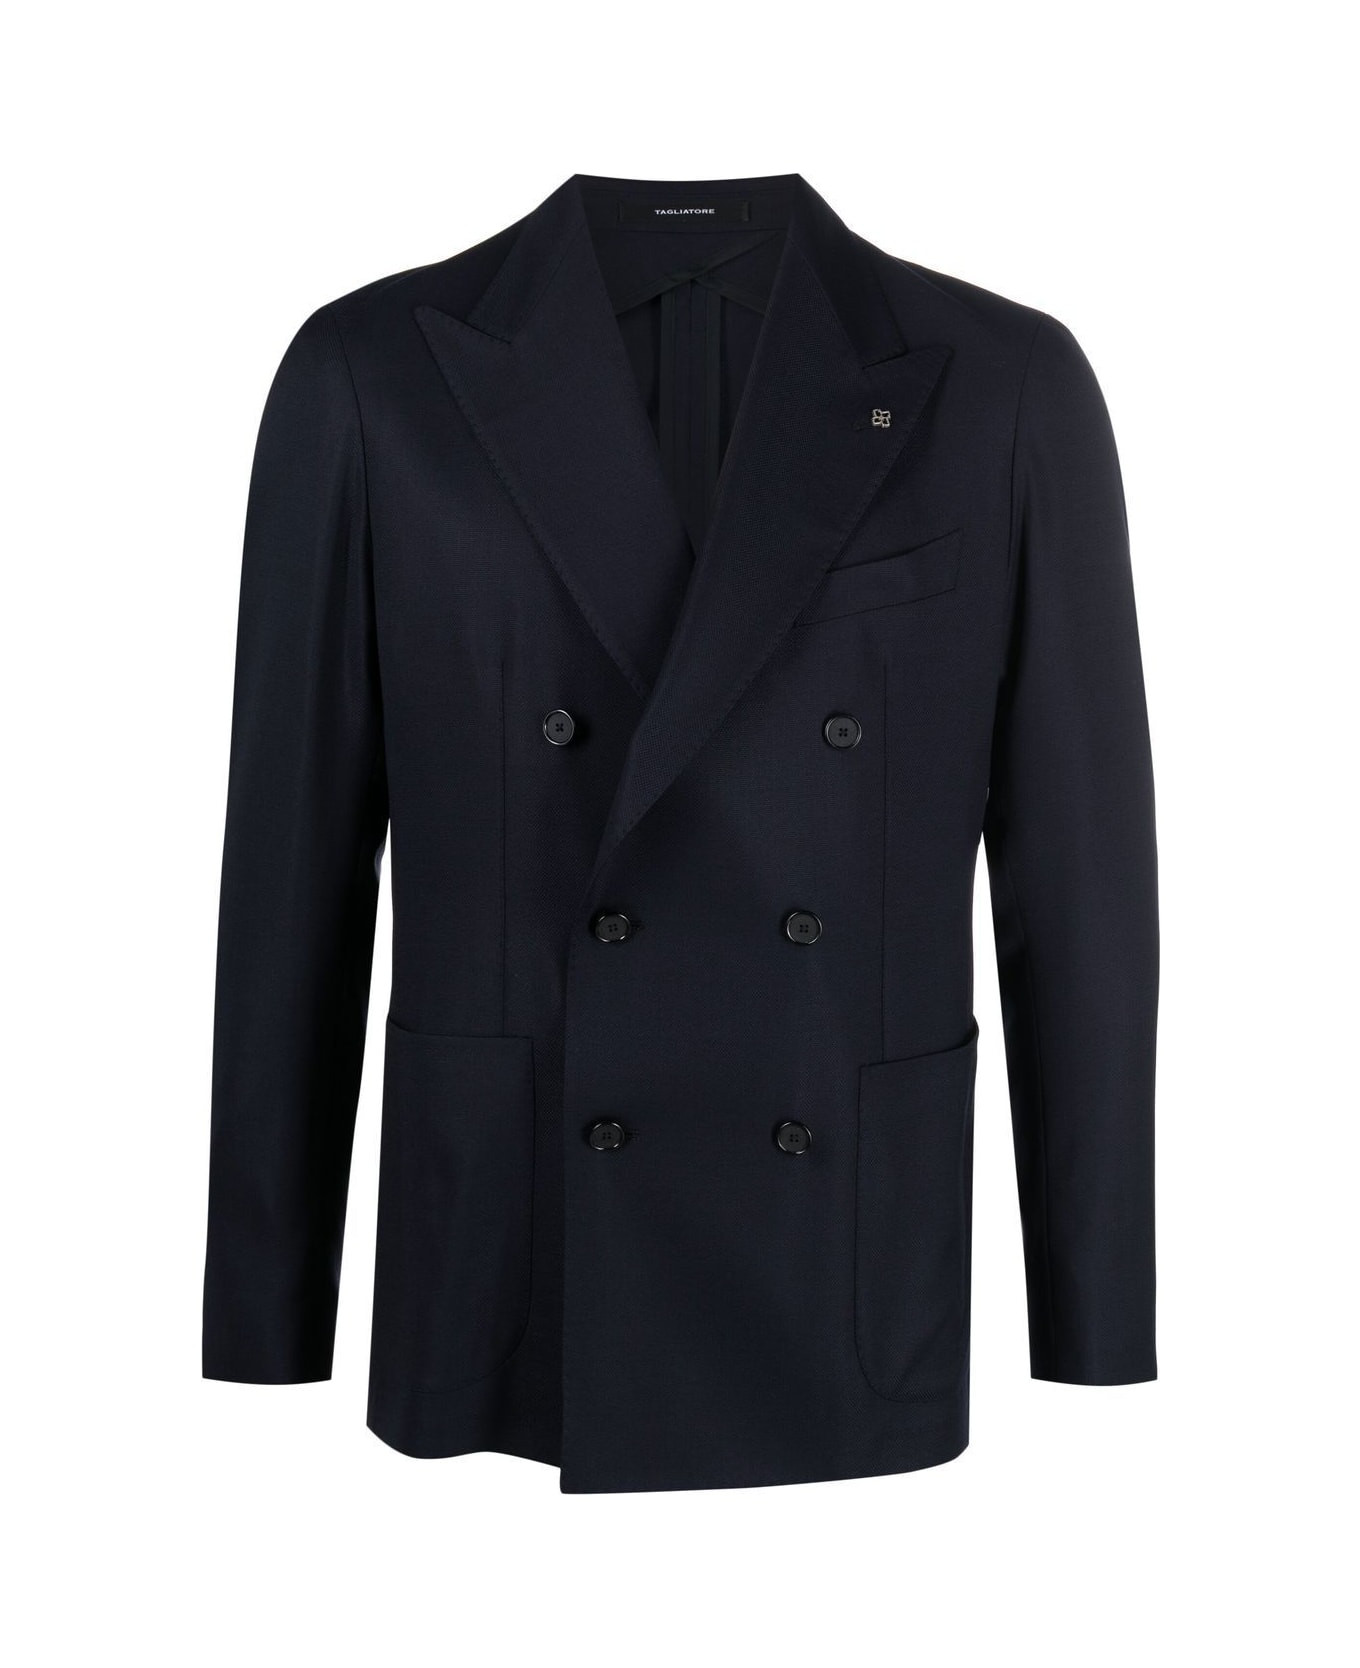 Tagliatore Double Breasted Jacket - Navy Blue